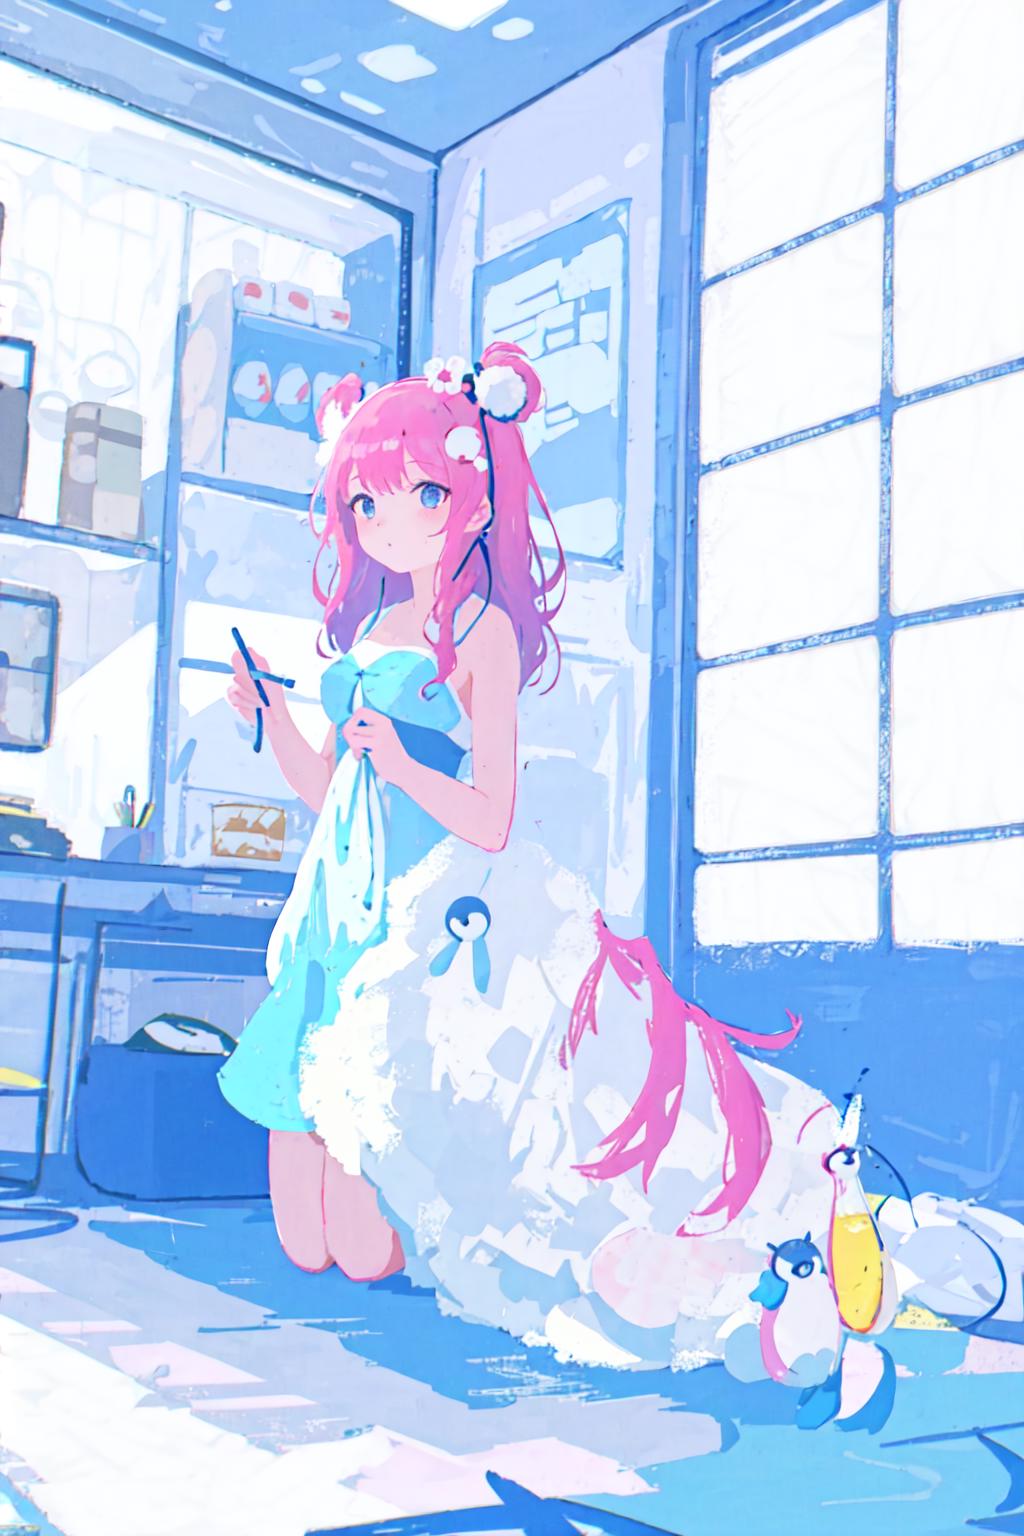 Anime-style girl wearing a blue dress and pink hair, sitting in a room with a refrigerator and a cat.